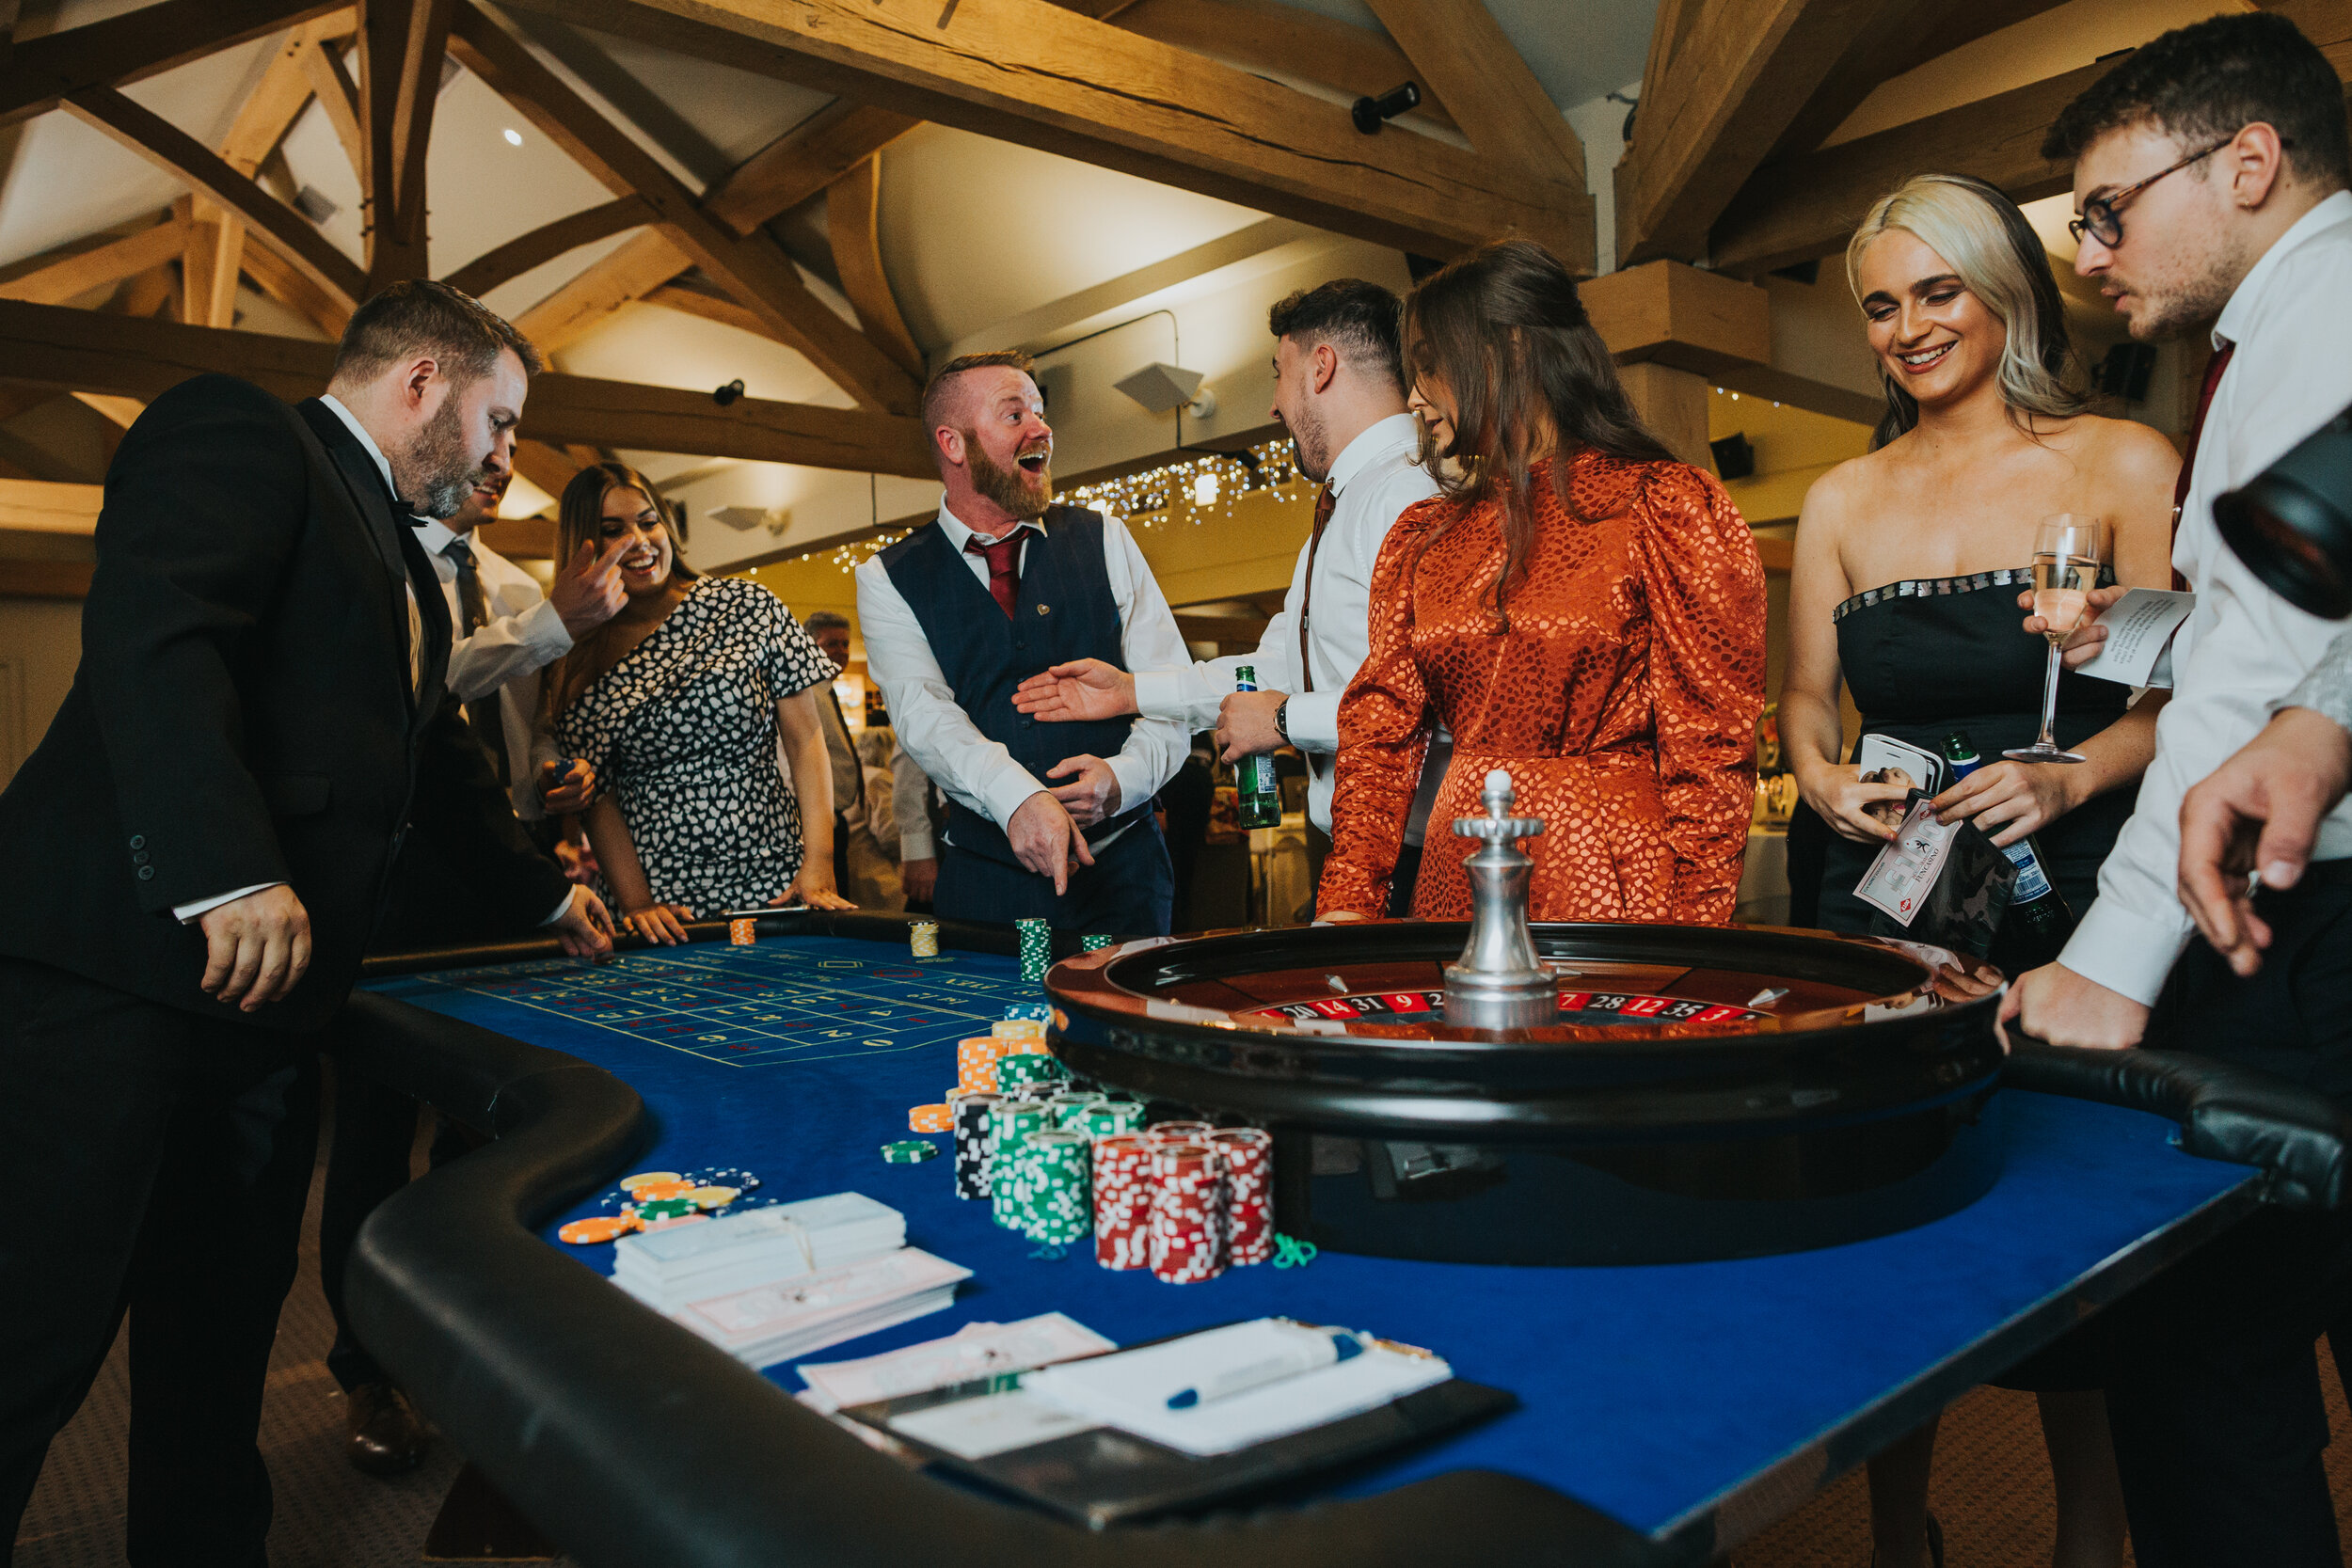 Guests have fun playing casino games, a gift to the groom from the bride. 